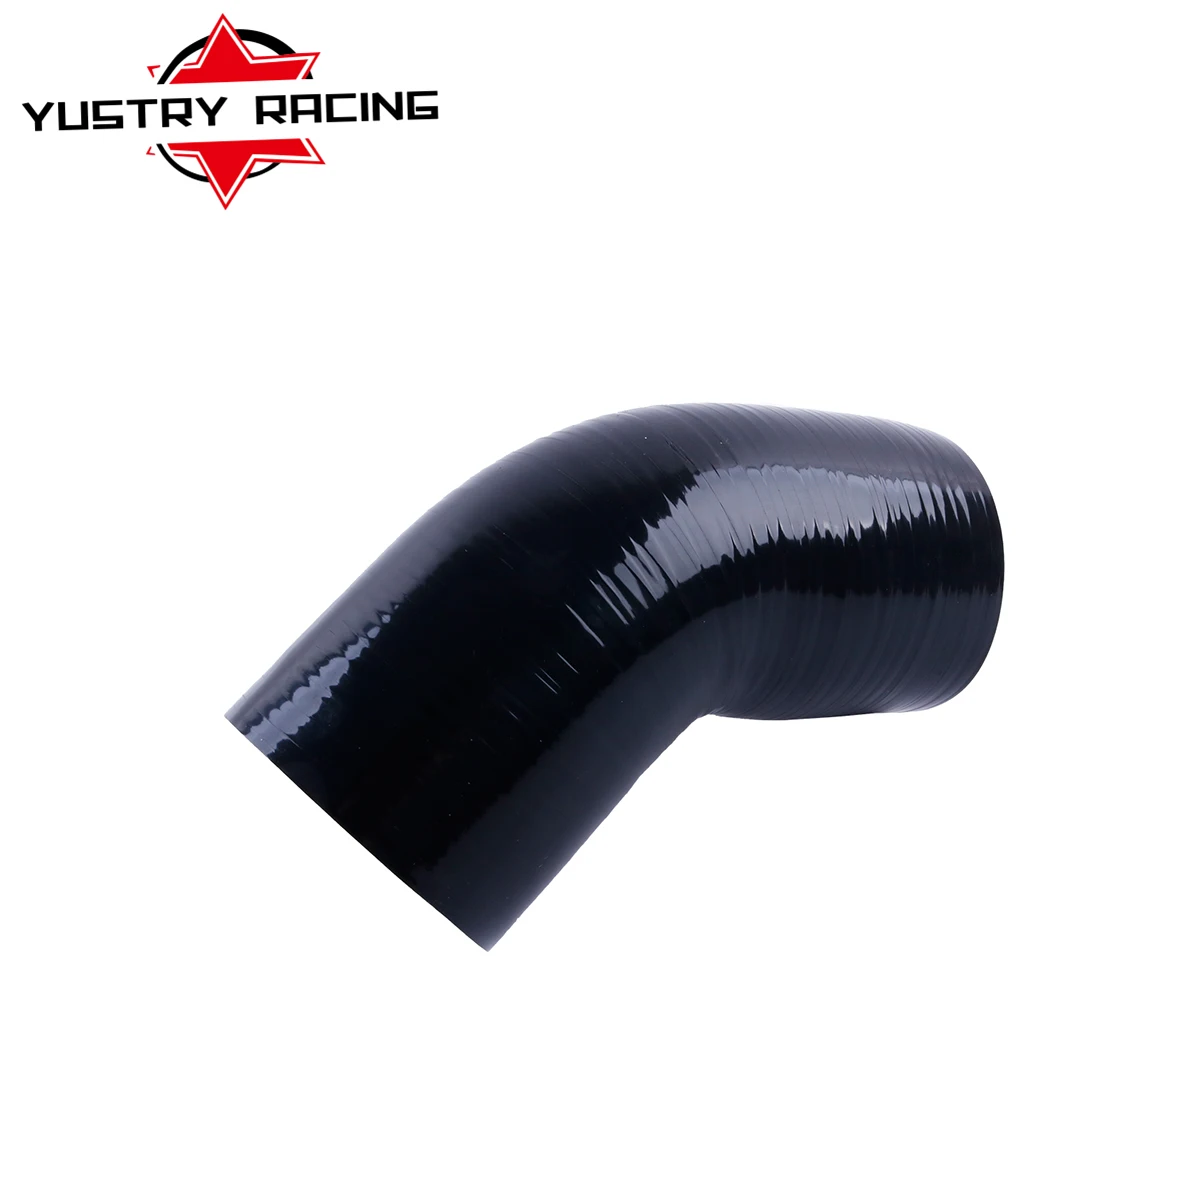 3-PLY Length:102mm 45 DEGREE ELBOW TURBO/INTERCOOLER/INTAKE SILICONE COUPLER HOSE ID(mm):45 48 50 54 57 60 63 70 76 80 83 89